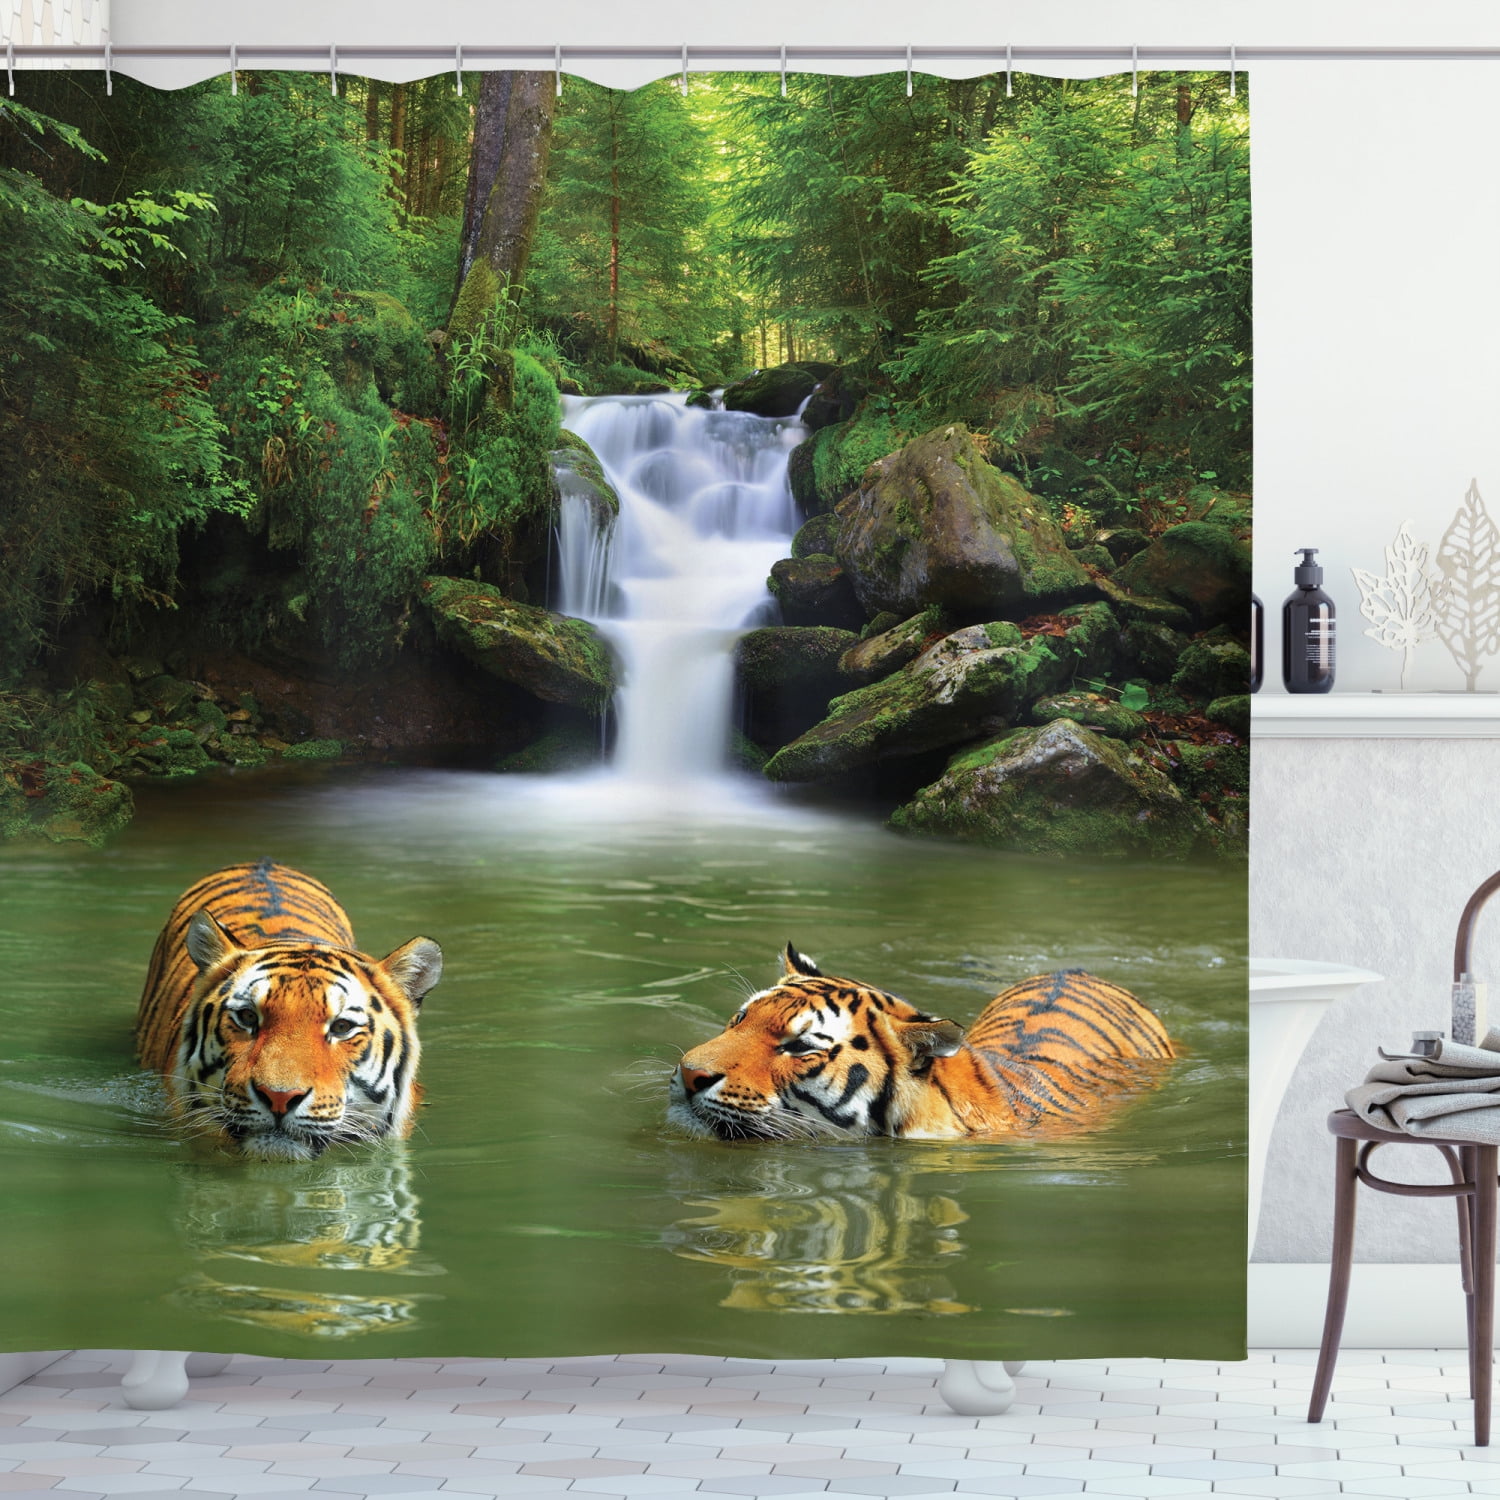 Tiger in the forest Shower Curtain set with 12hooks Bathroom Home decor 71inch 